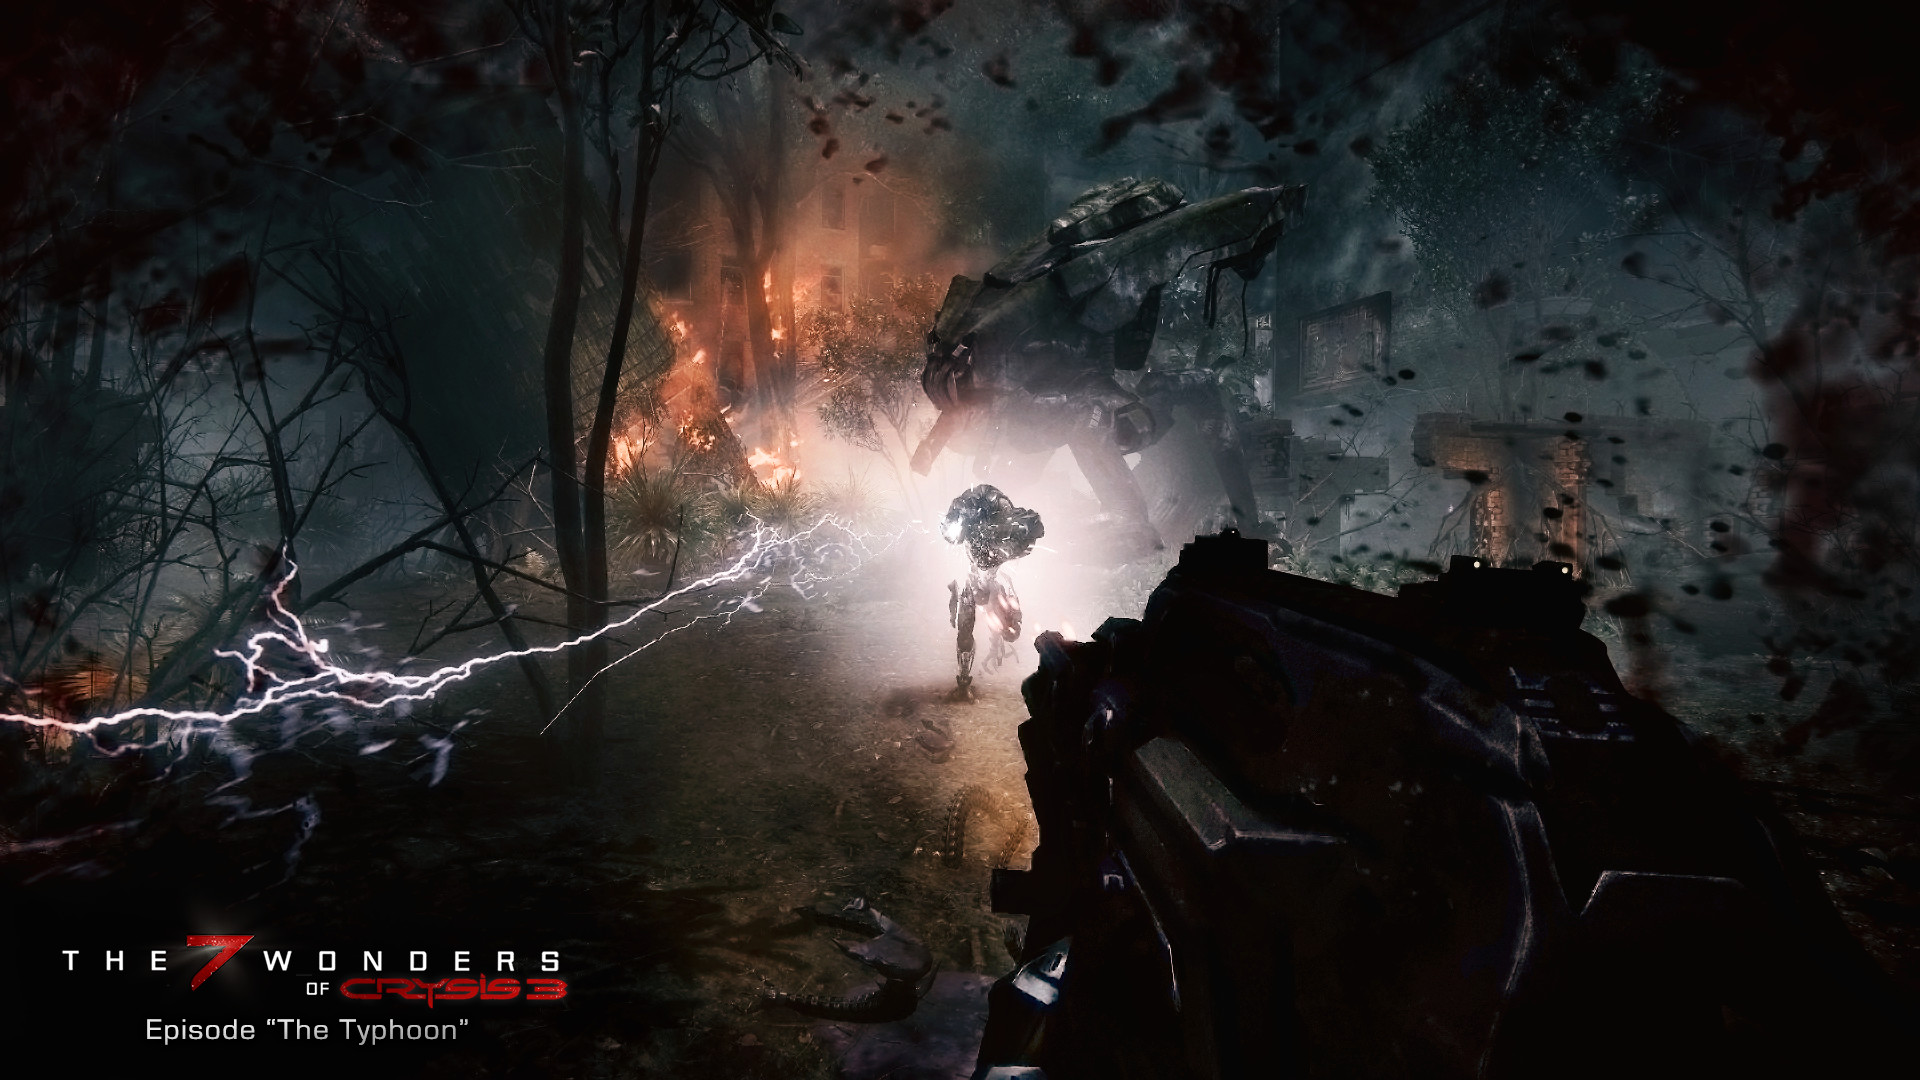 Screenshot of Crysis 3 video game during a firefight